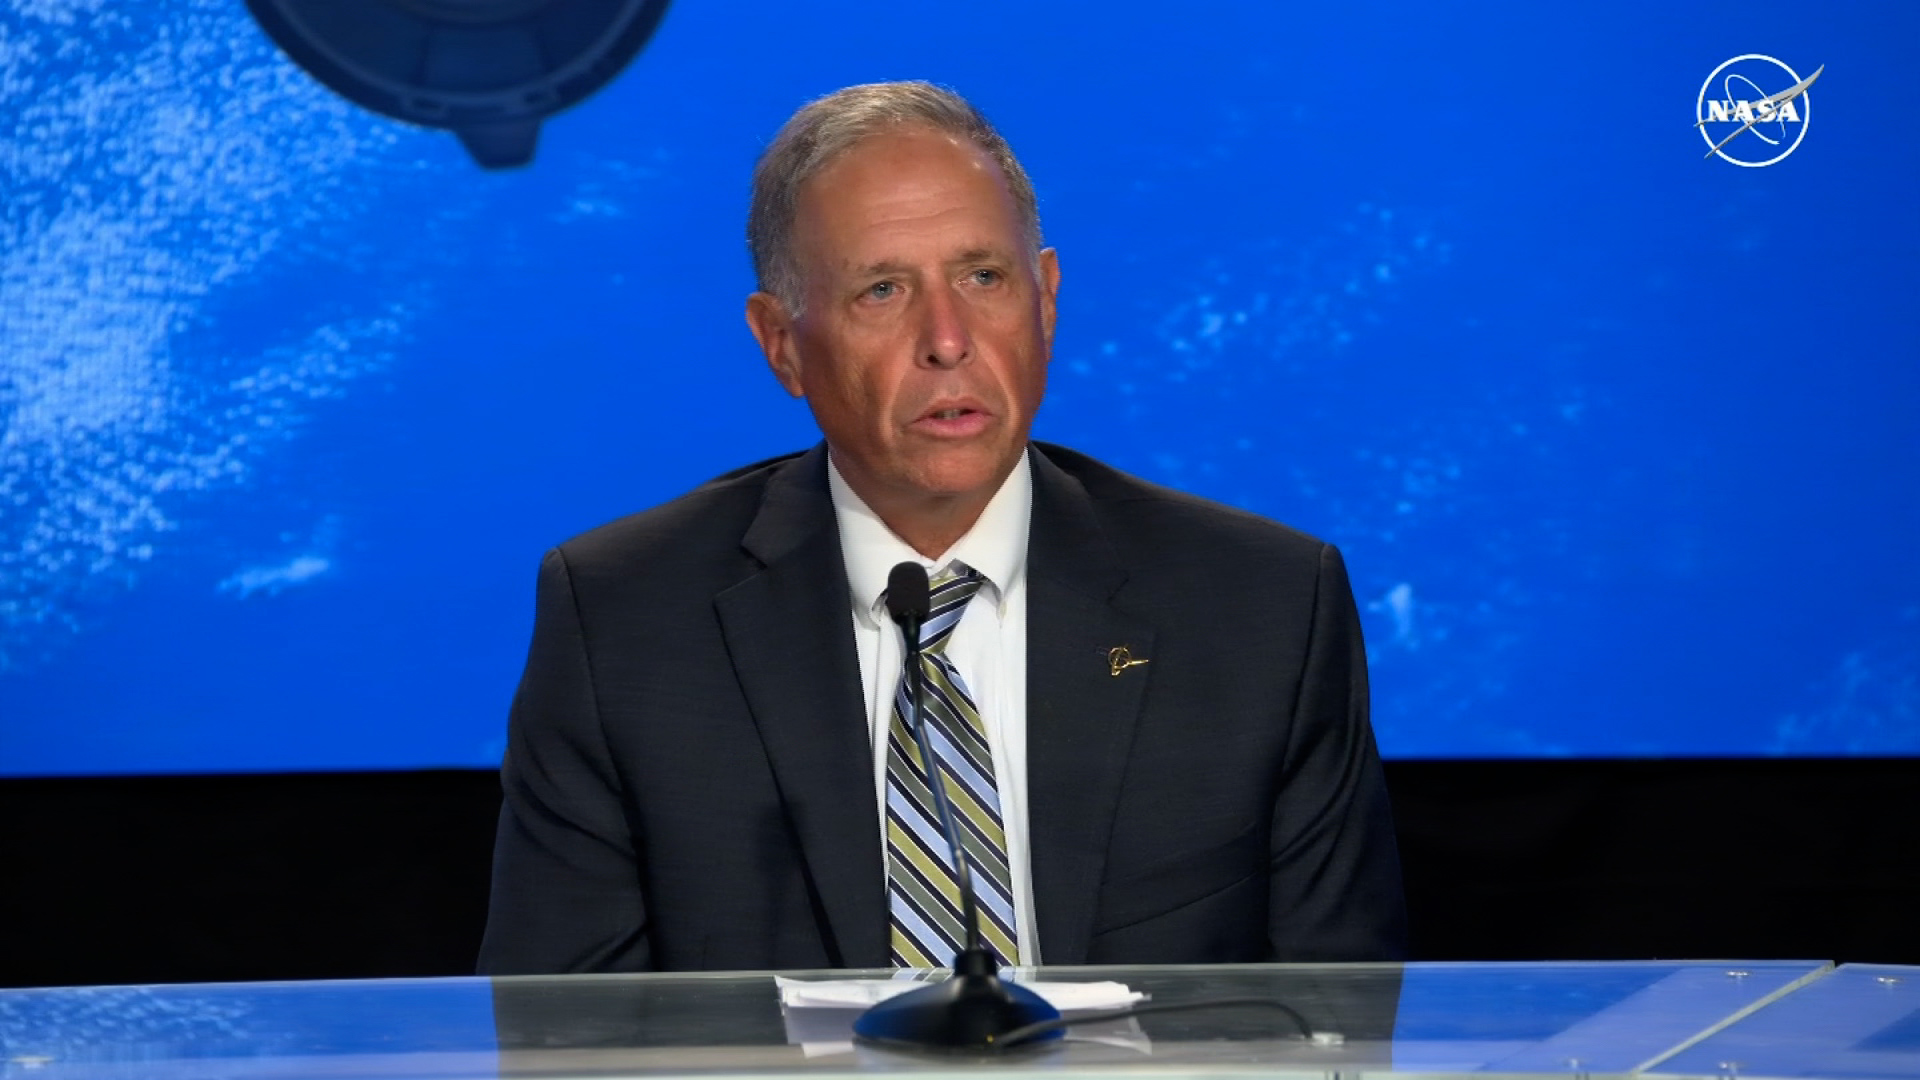 Mark Nappi, vice president and program manager for the Commercial Crew Program at Boeing, speaks at a news conference in Cape Canaveral, Florida, on June 1.